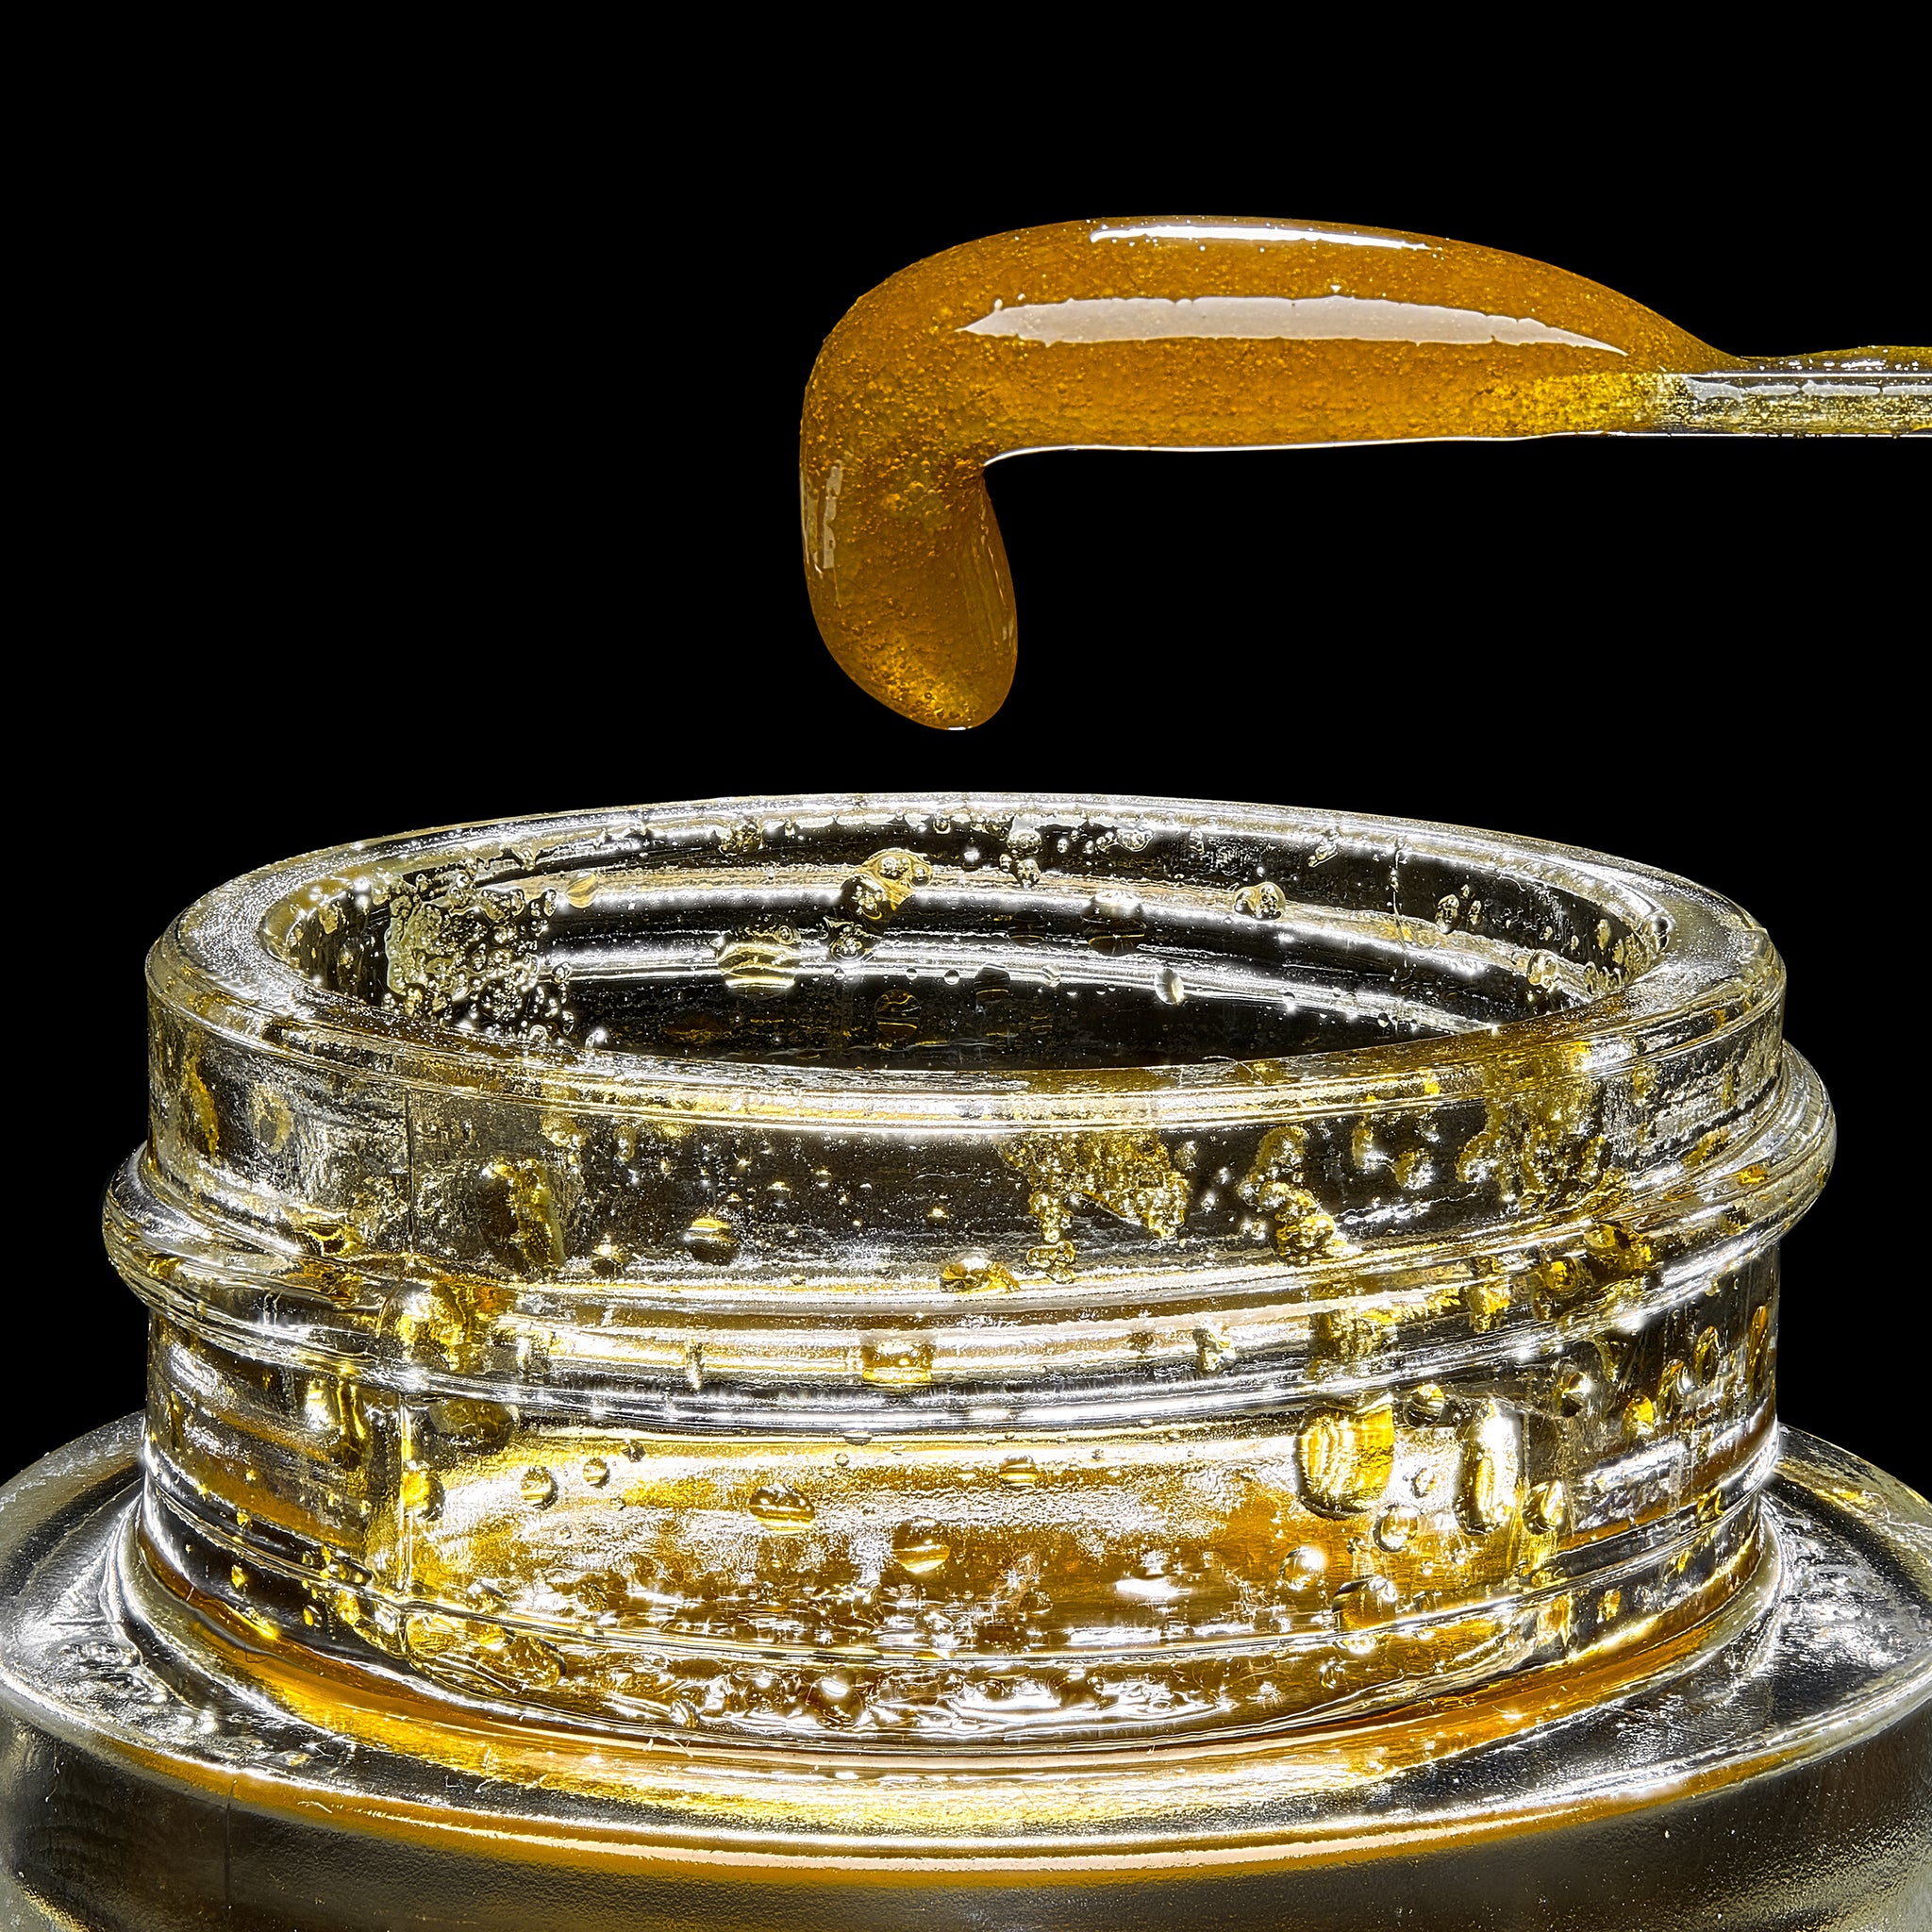 CBD Hemp Dabs, Extracts, Concentrate, Live resin & more.